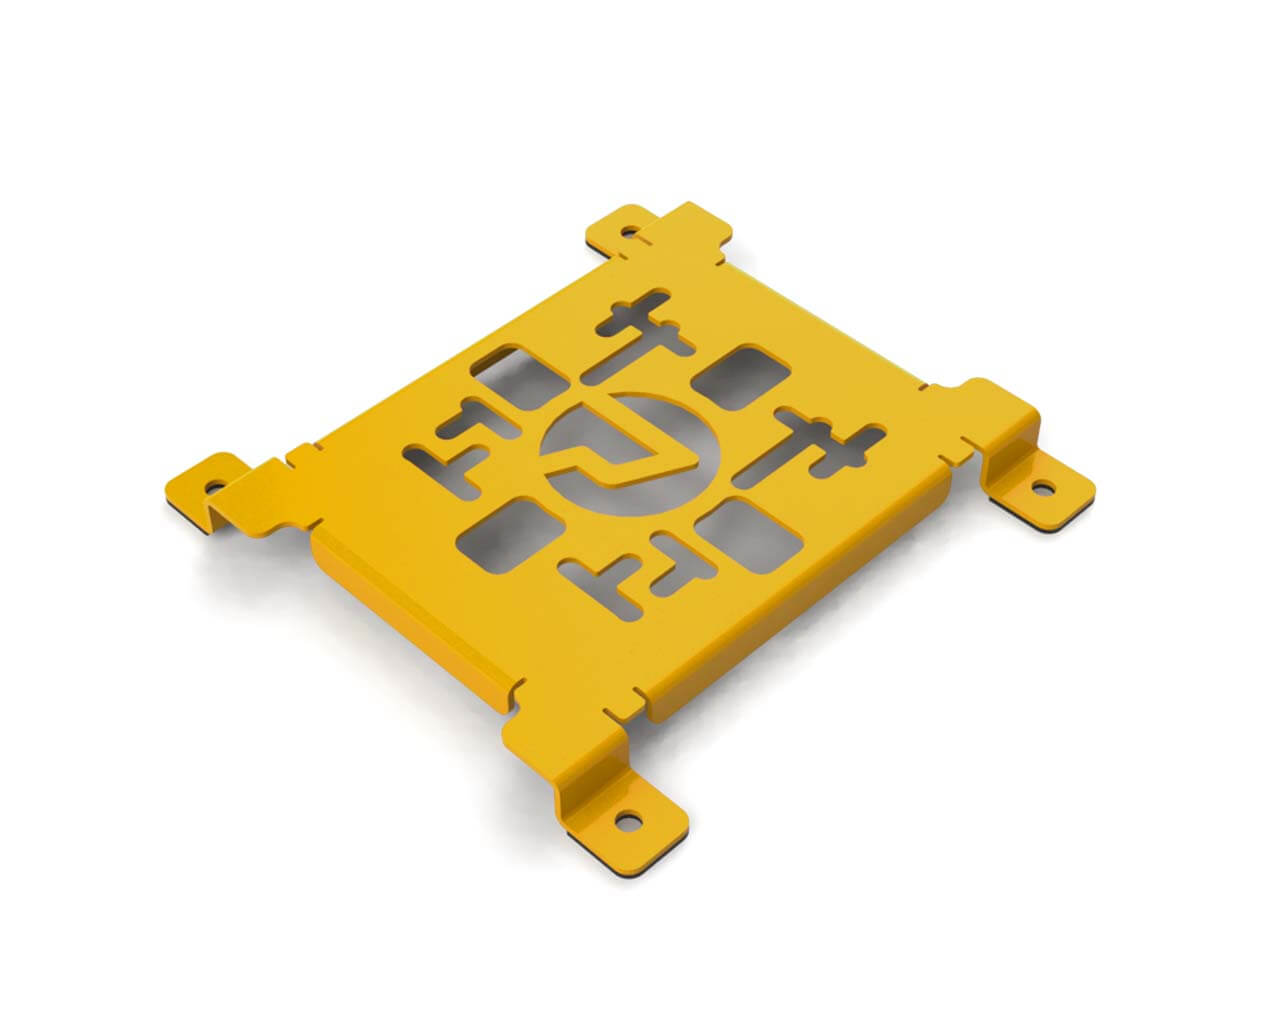 PrimoChill SX Spider Mount Bracket - 120mm Series - PrimoChill - KEEPING IT COOL Yellow